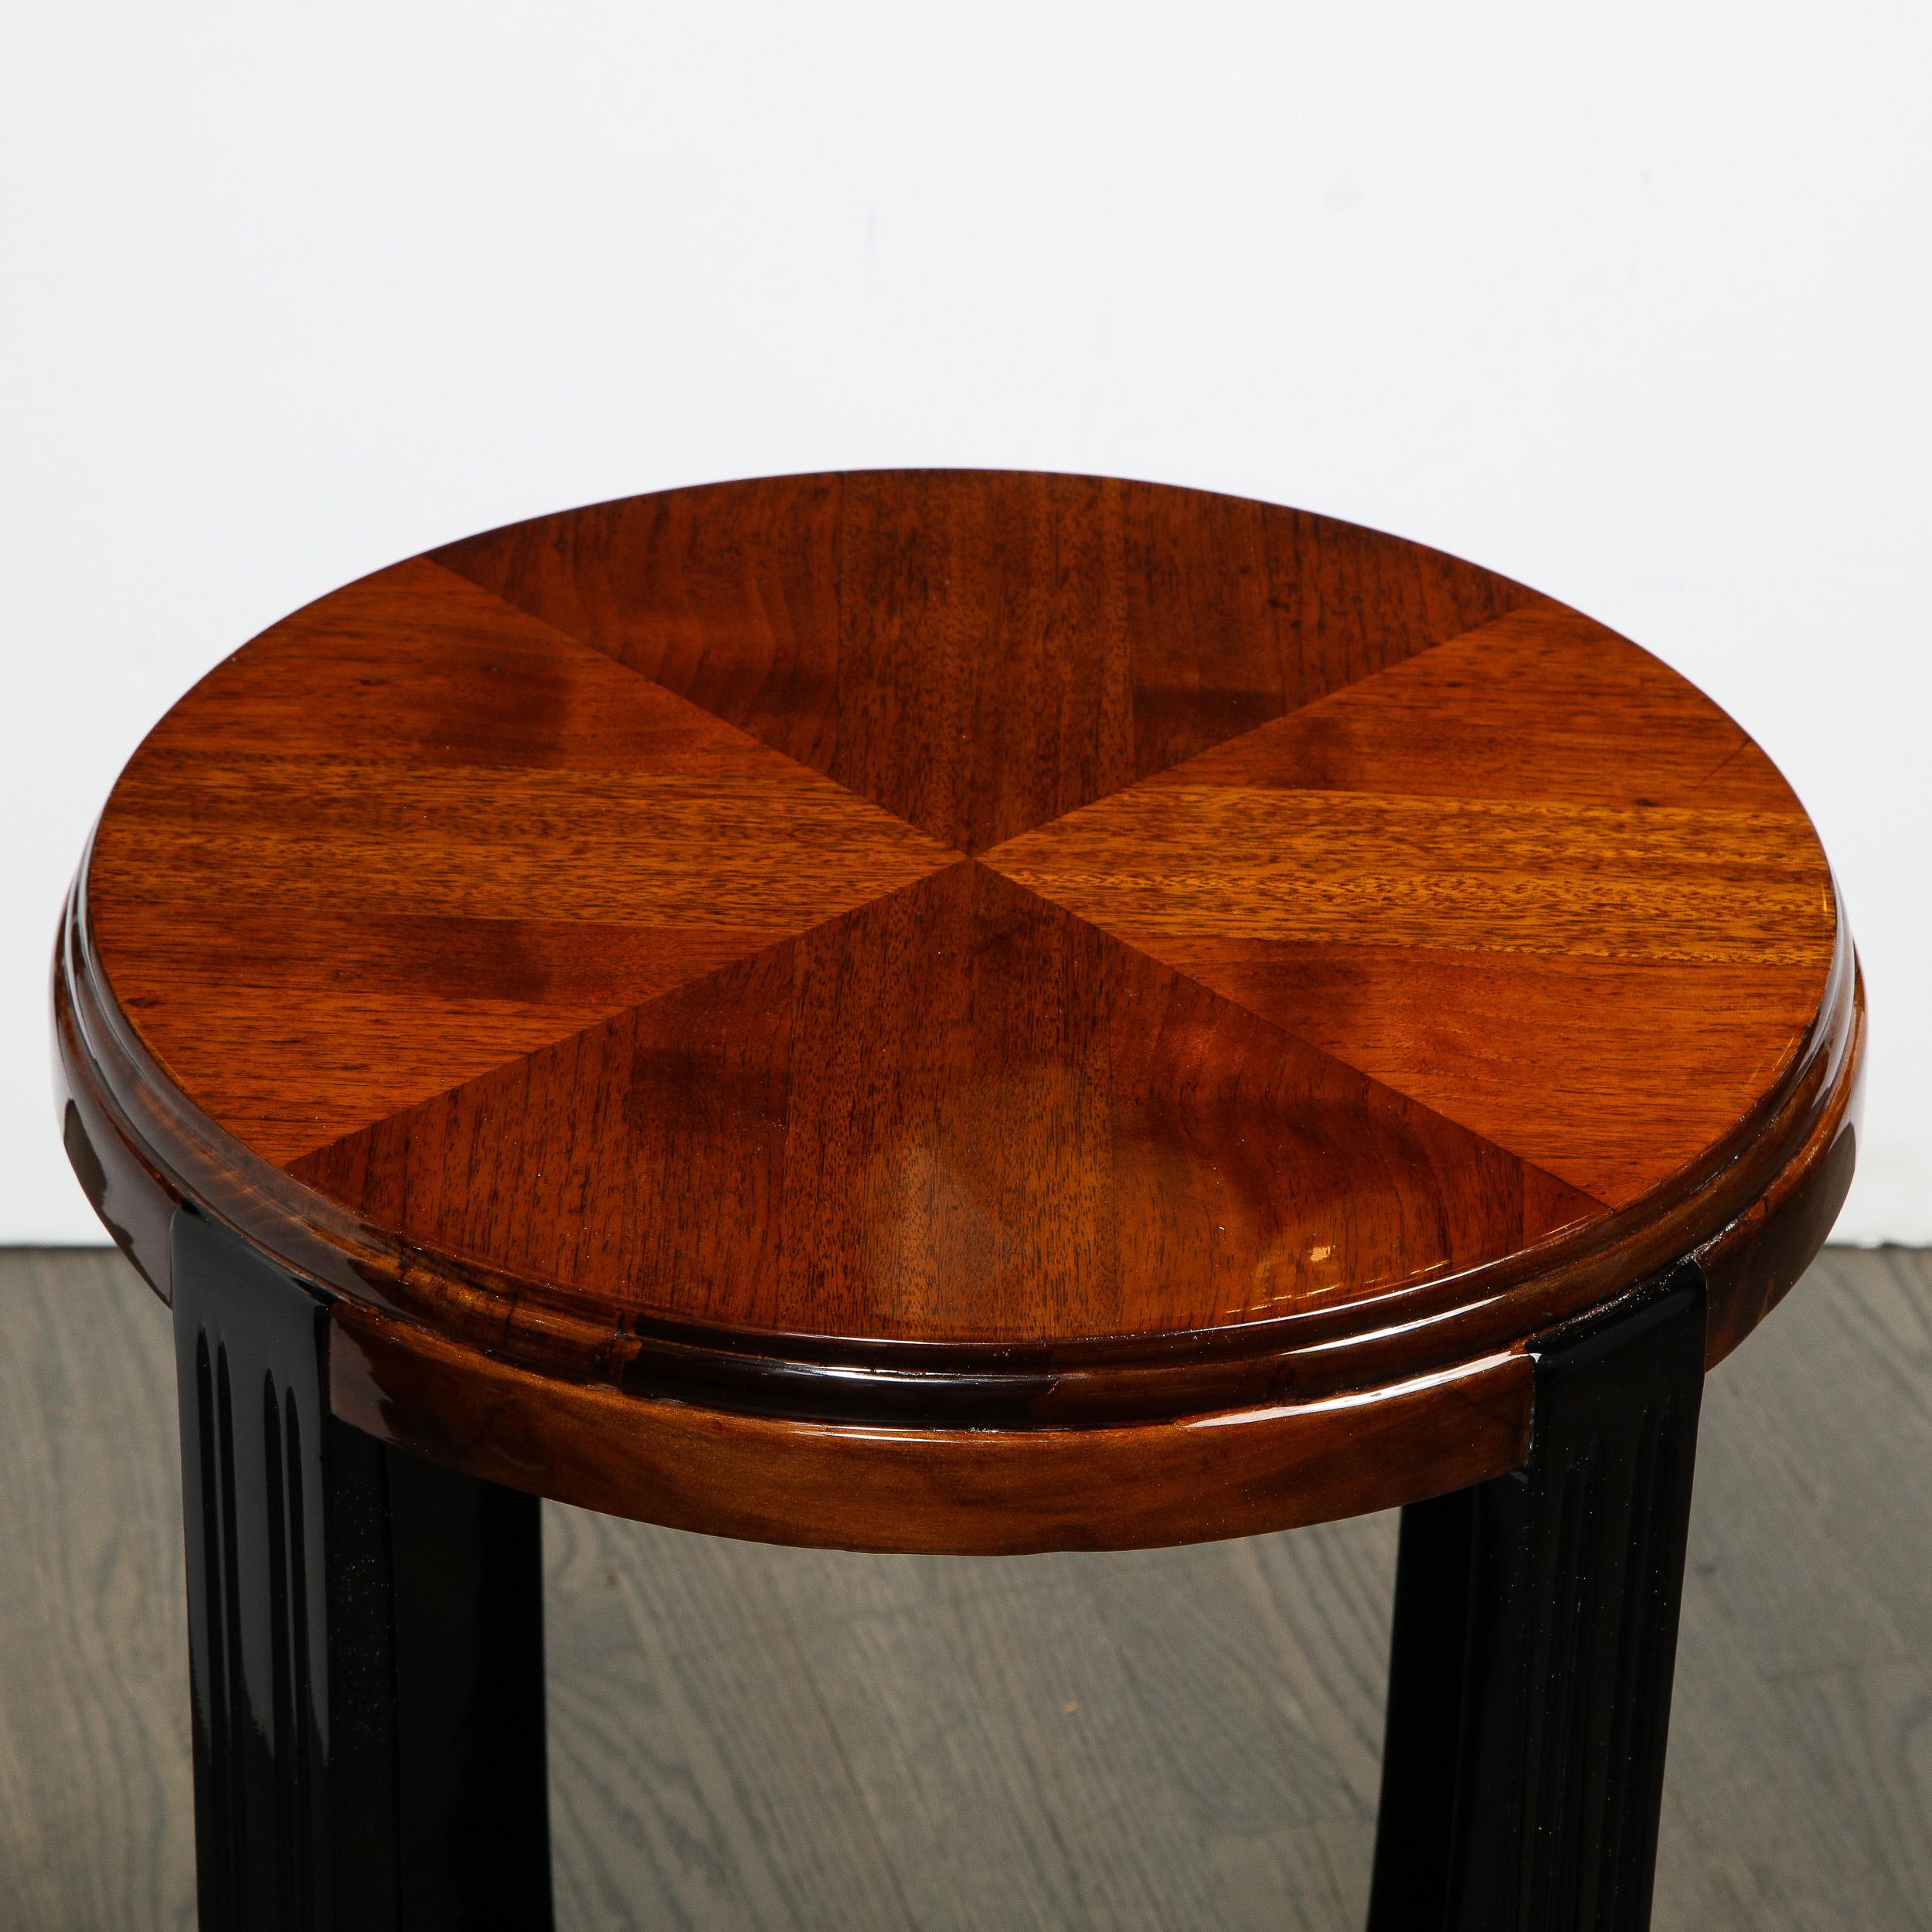 This beautiful Art Deco Machine Age table was realized in the United States circa 1935. It features a round top with geometric marquetry in bookmatched walnut; black lacquer streamlined supports; and an X-form base in walnut with streamlined